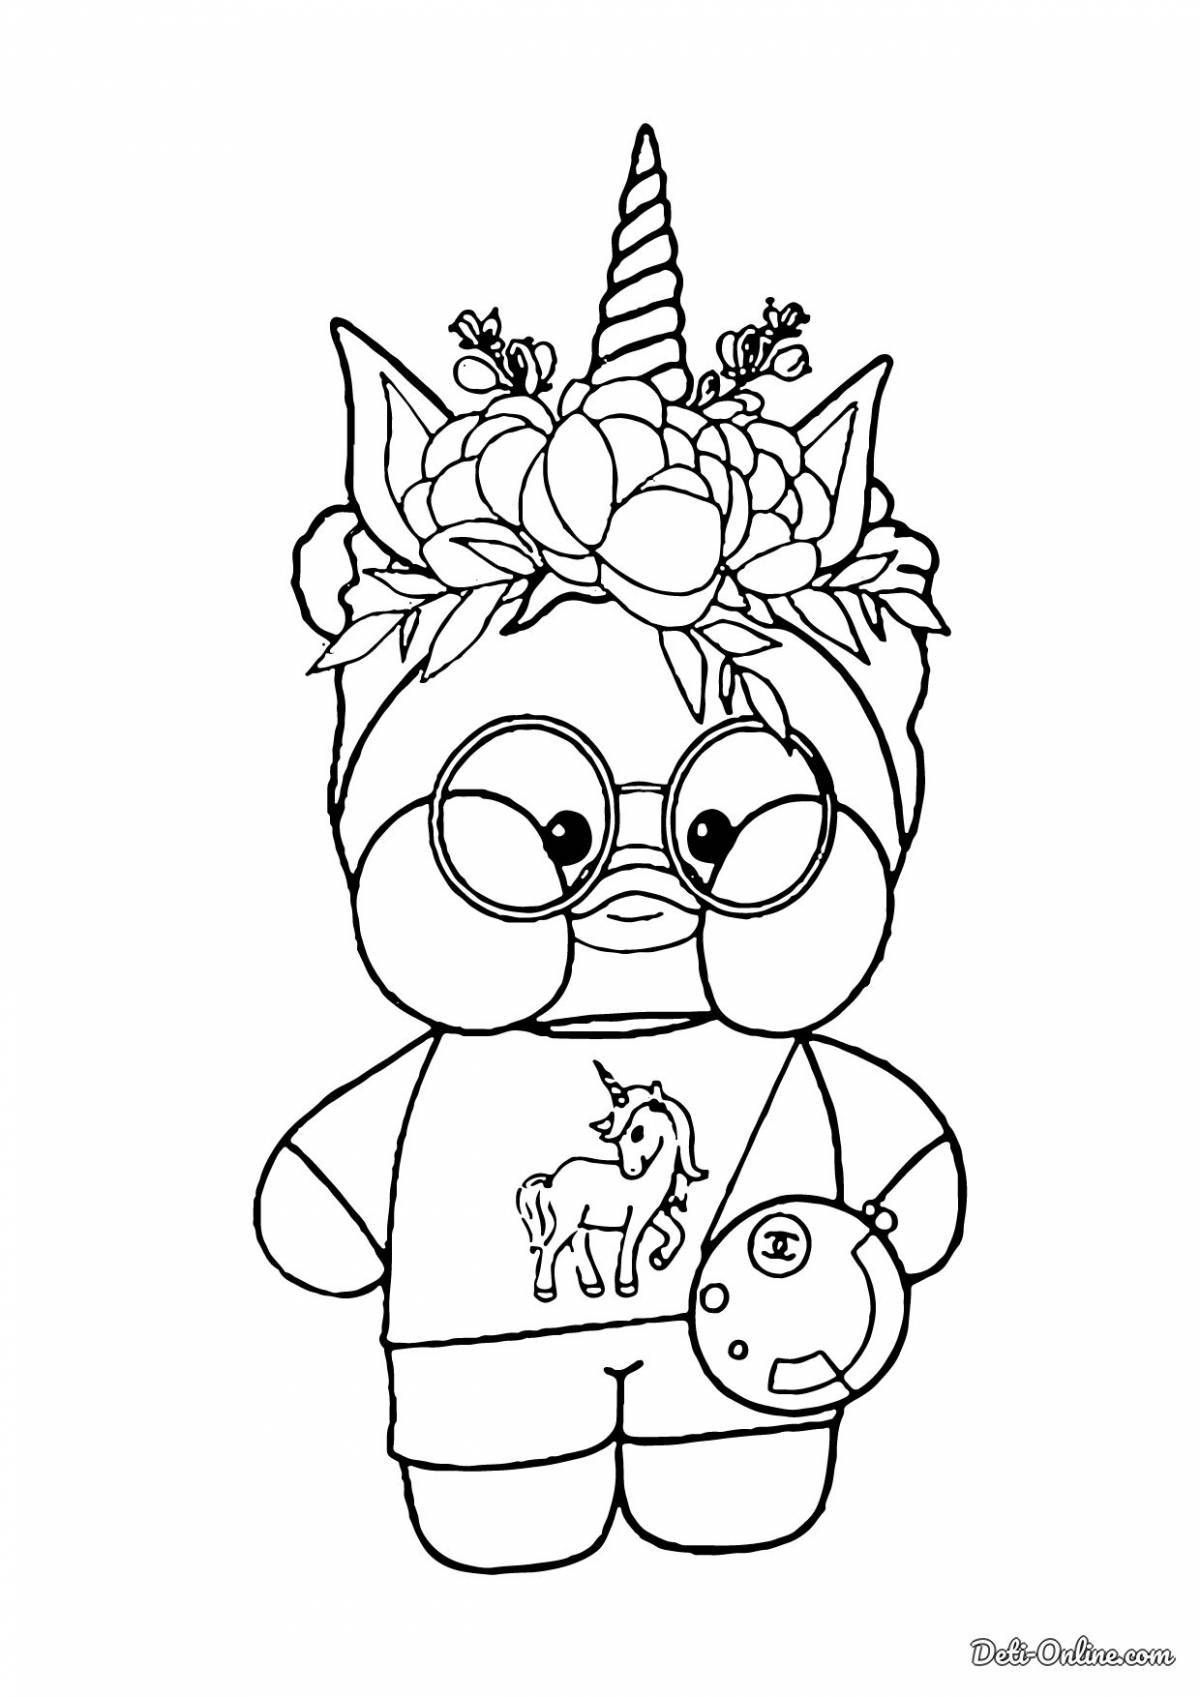 Lalafanfan Holiday Coloring Page